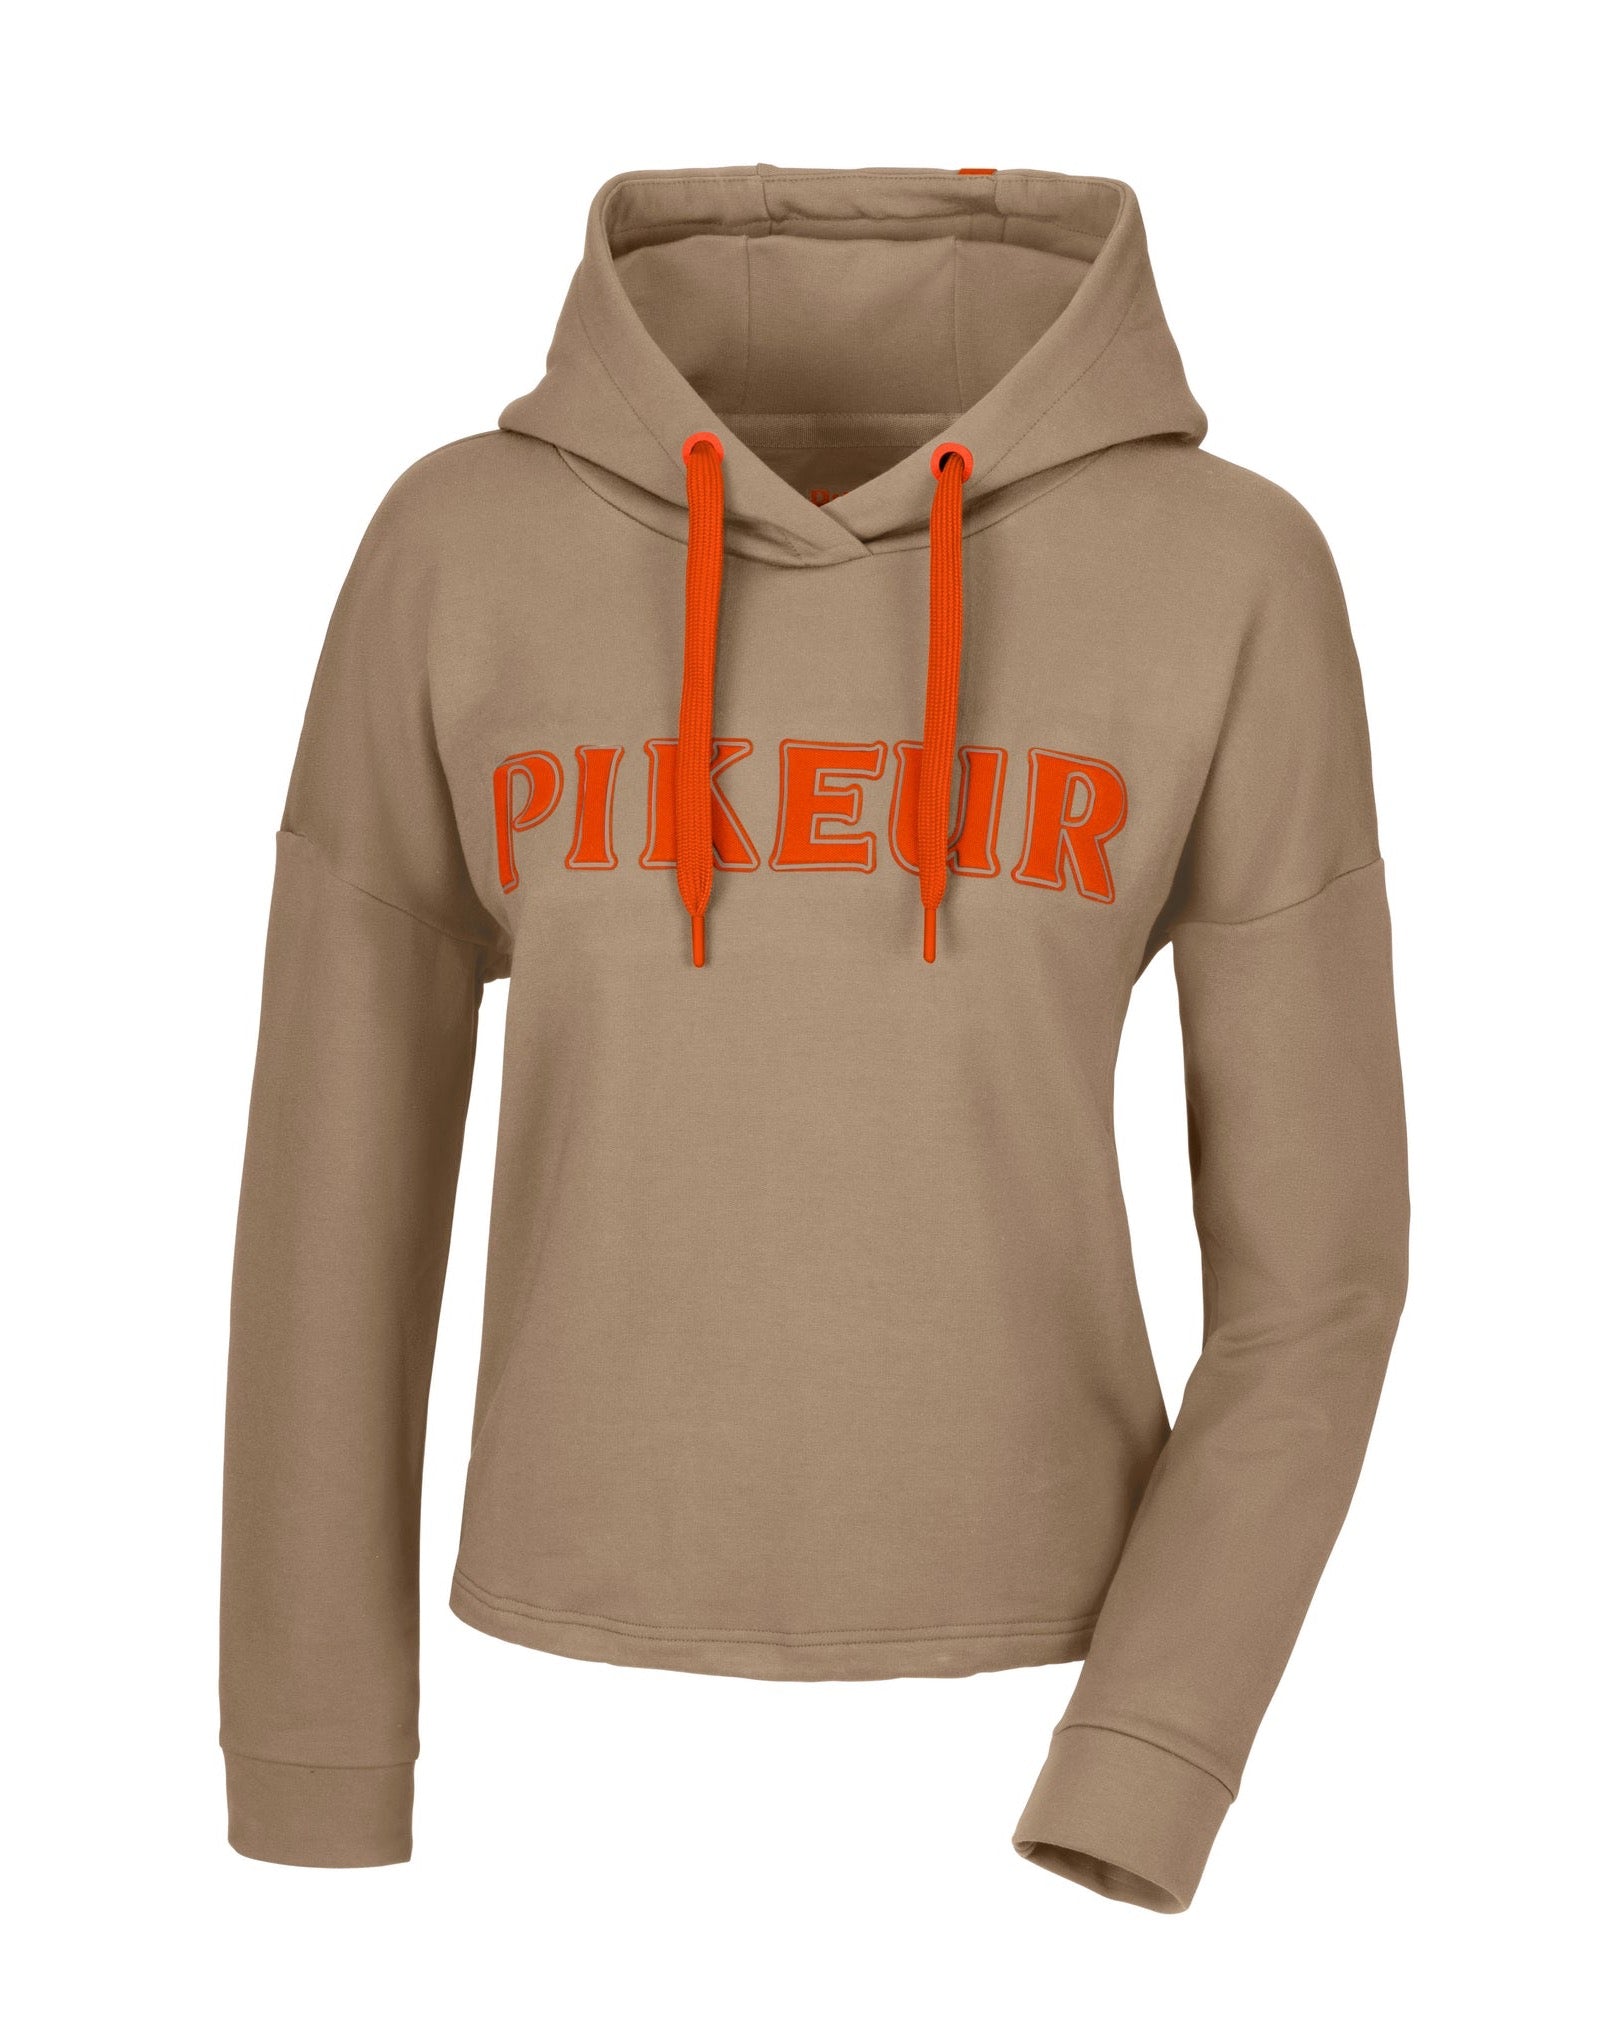 Pikeur sports hoody in soft taupe